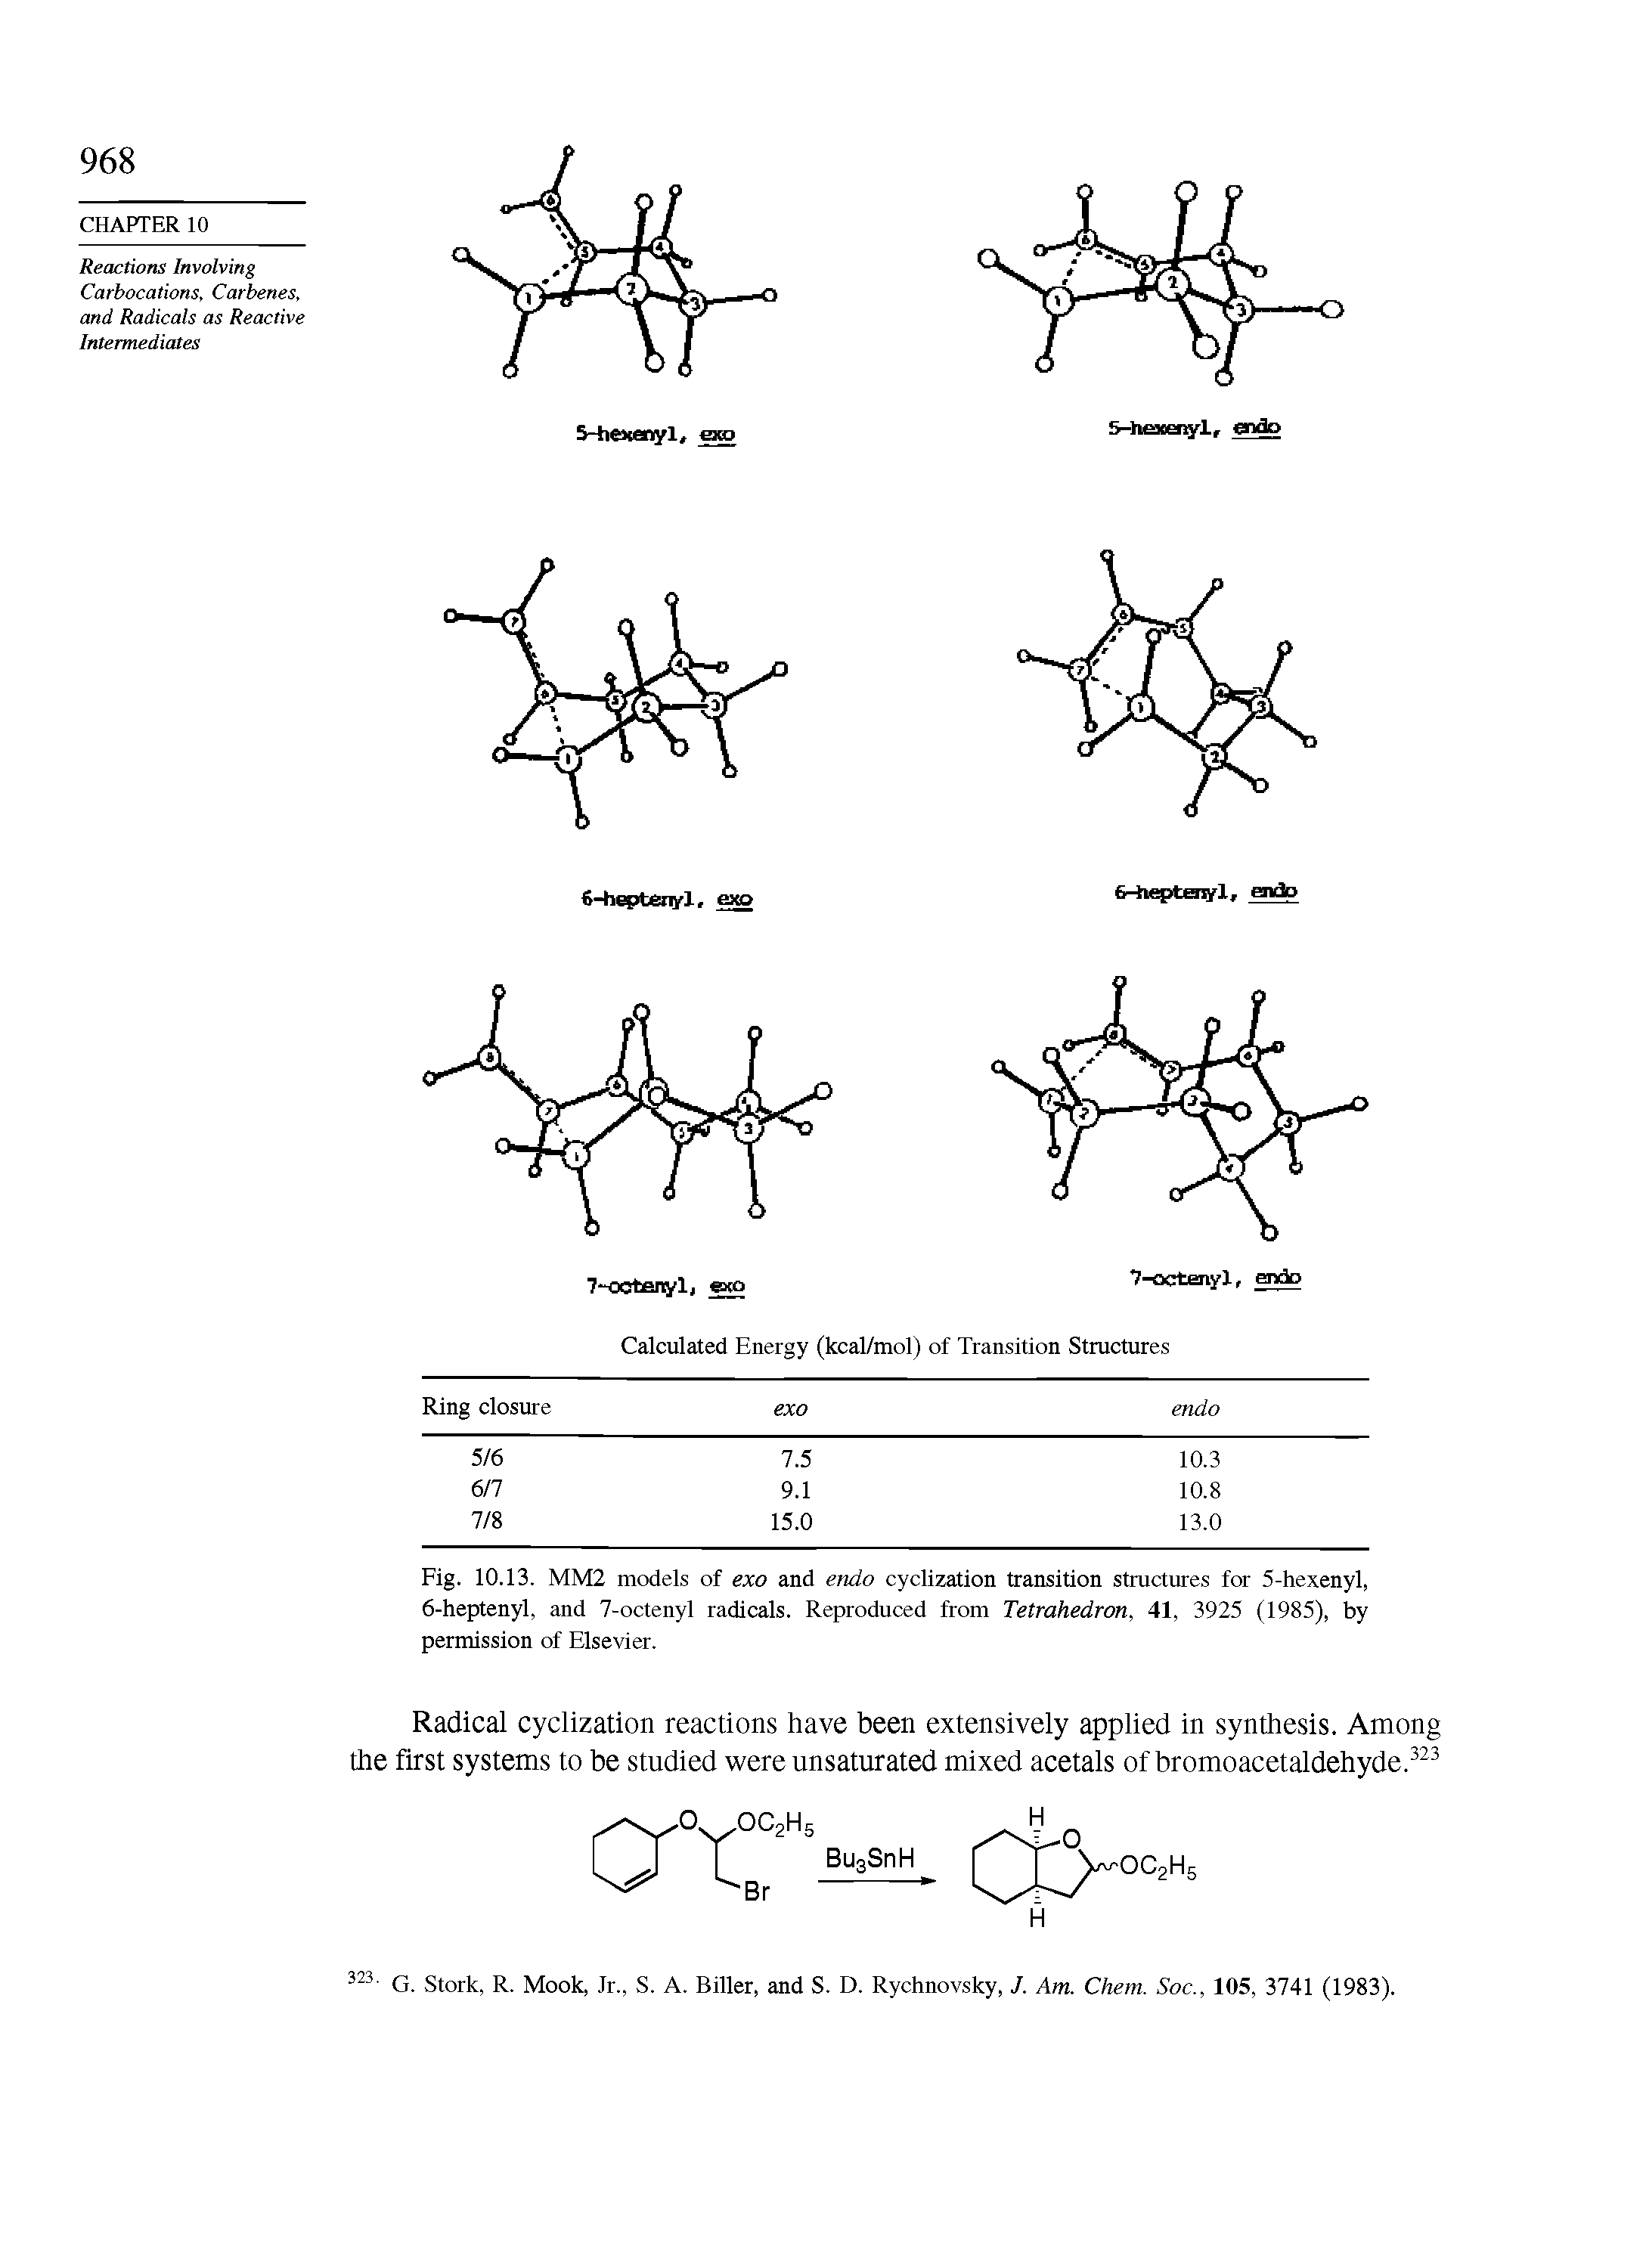 Fig. 10.13. MM2 models of exo and endo cyclization transition structures for 5-hexenyl, 6-heptenyl, and 7-octenyl radicals. Reproduced from Tetrahedron, 41, 3925 (1985), by permission of Elsevier.